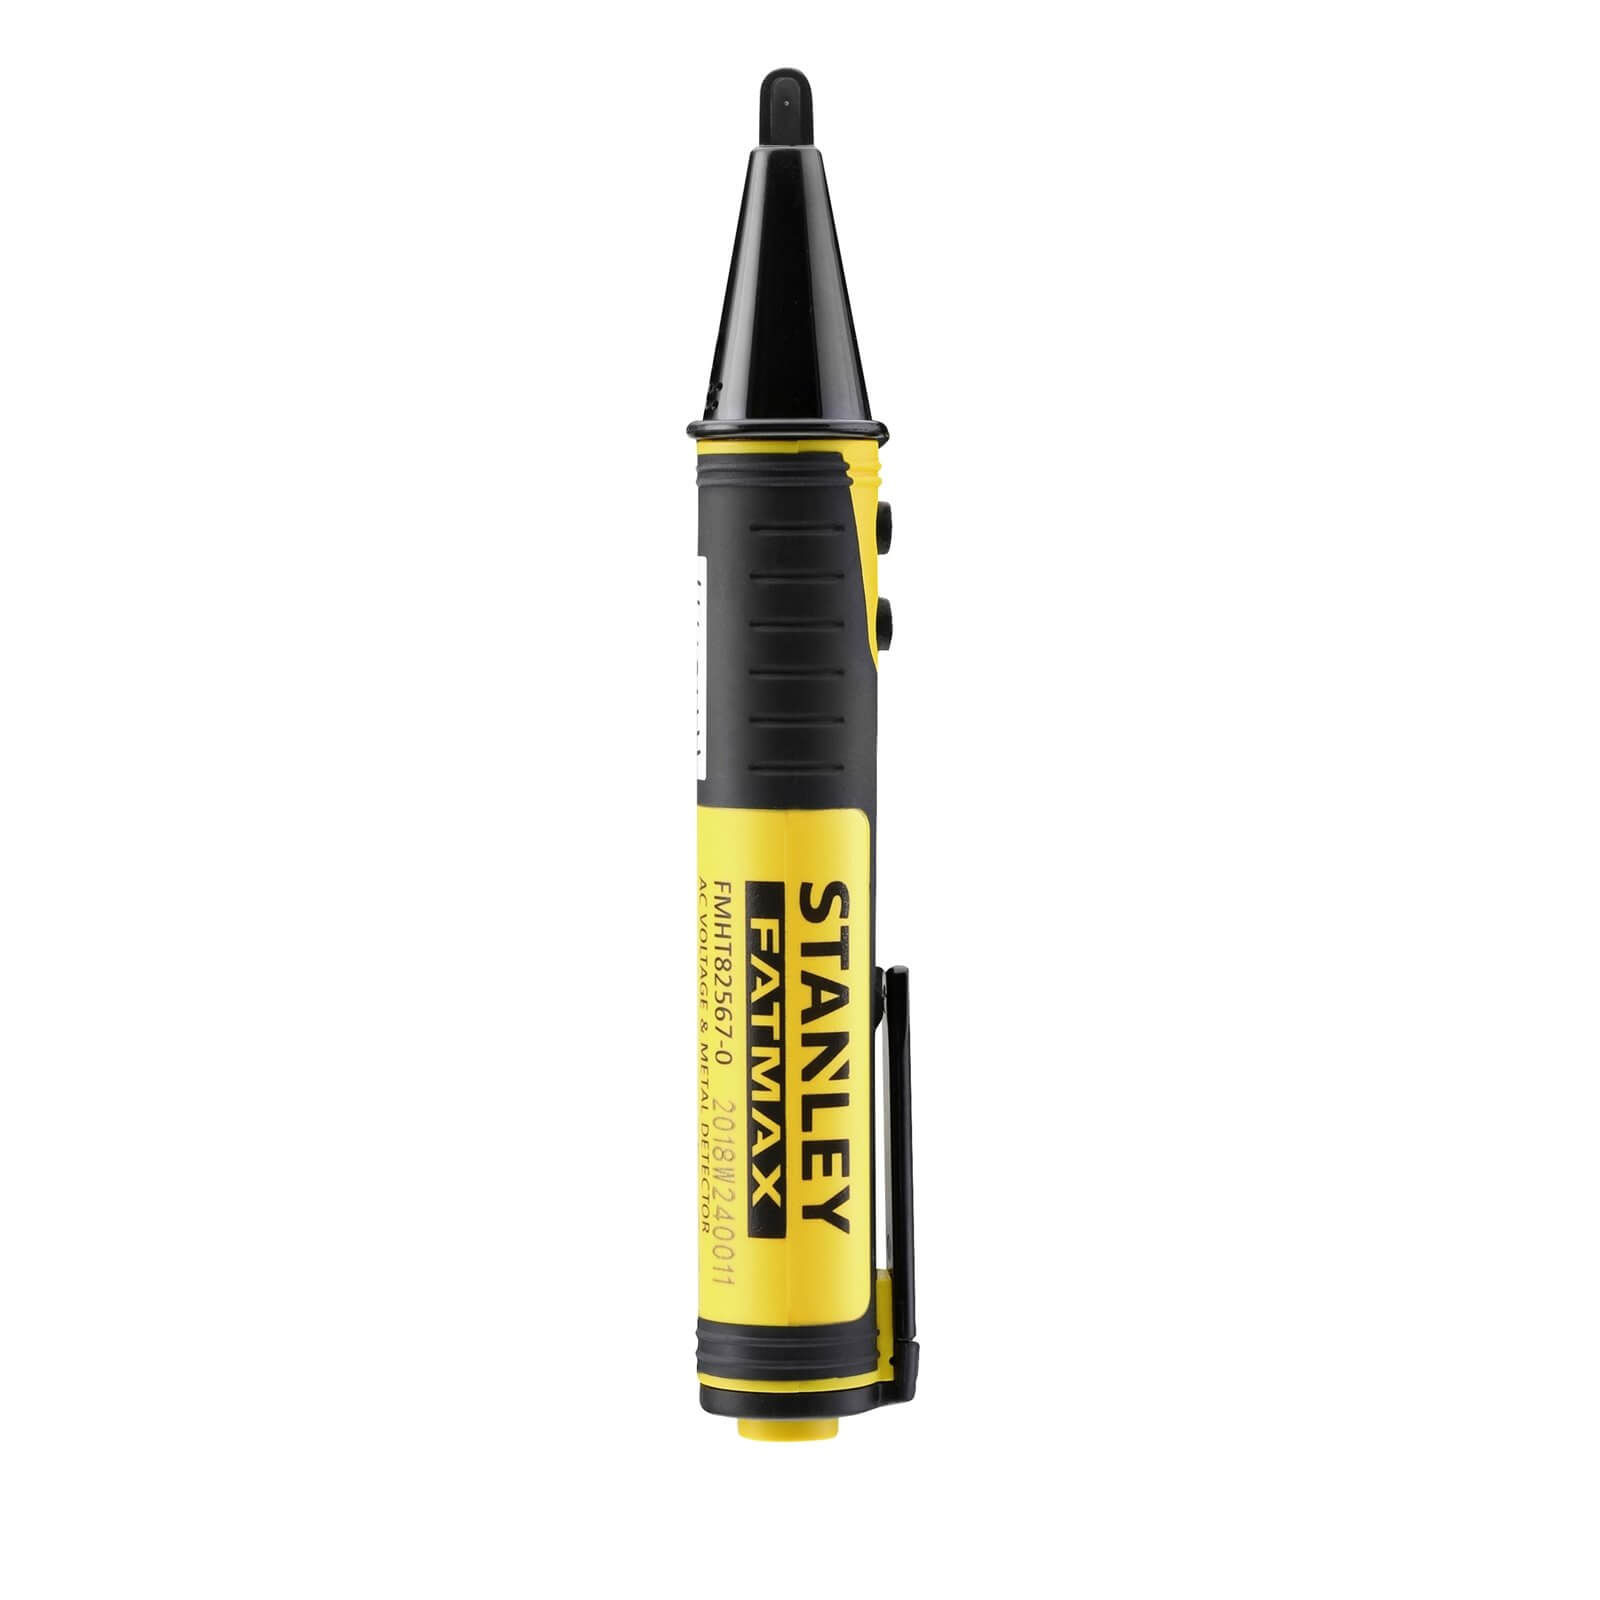 Stanley Fatmax FMHT82567-0 Non Contact Metal and Voltage Detector